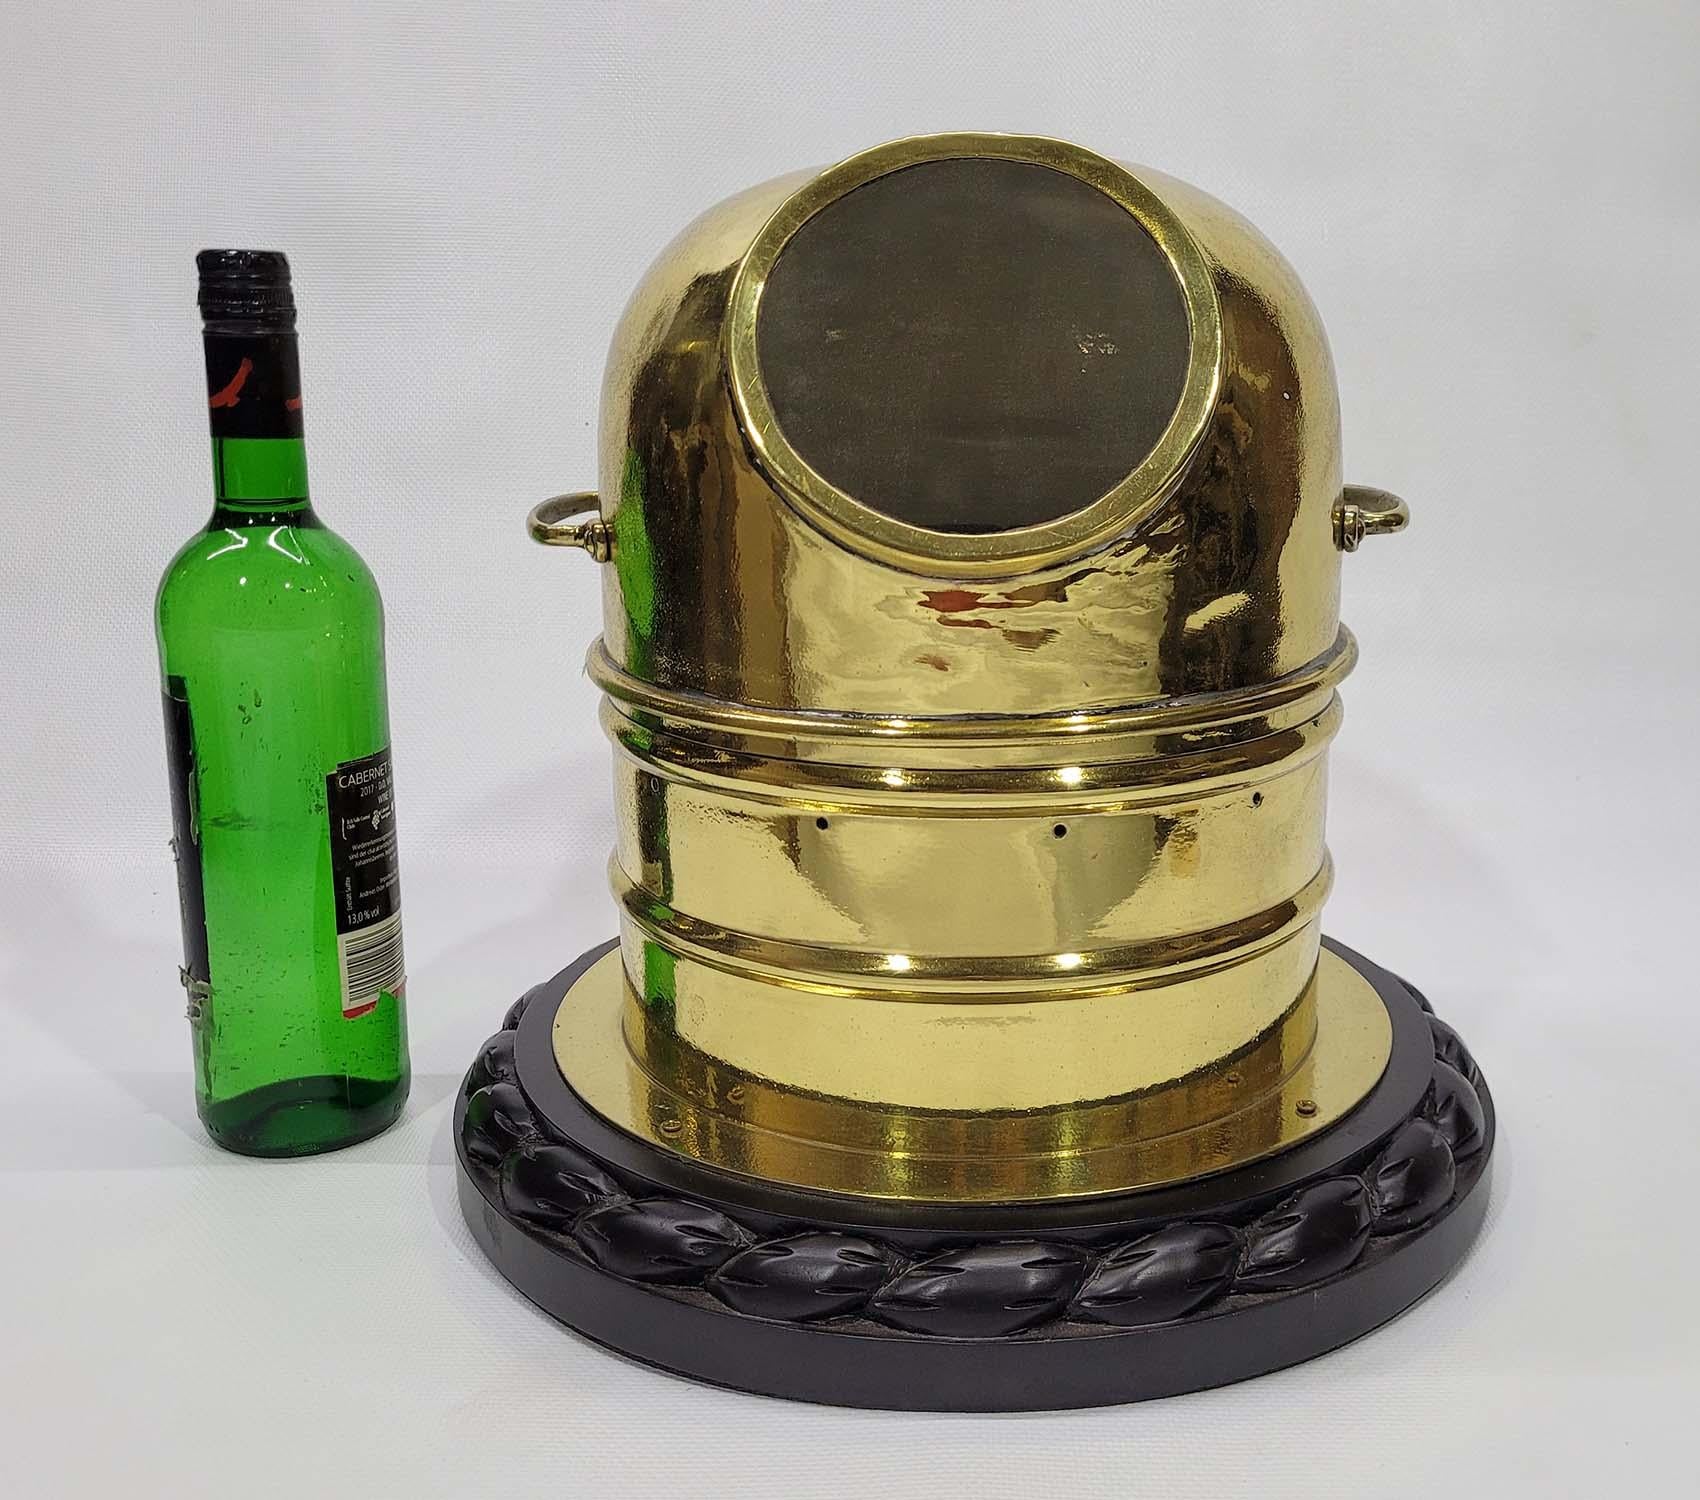 Solid brass boat compass binnacle that has been meticulously polished and lacquered. Gimballed compass inside. Mounted to a varnished wood base with carved rope border. Interior has been fitted with warm led lighting. 

Weight: 5 lbs.
Overall